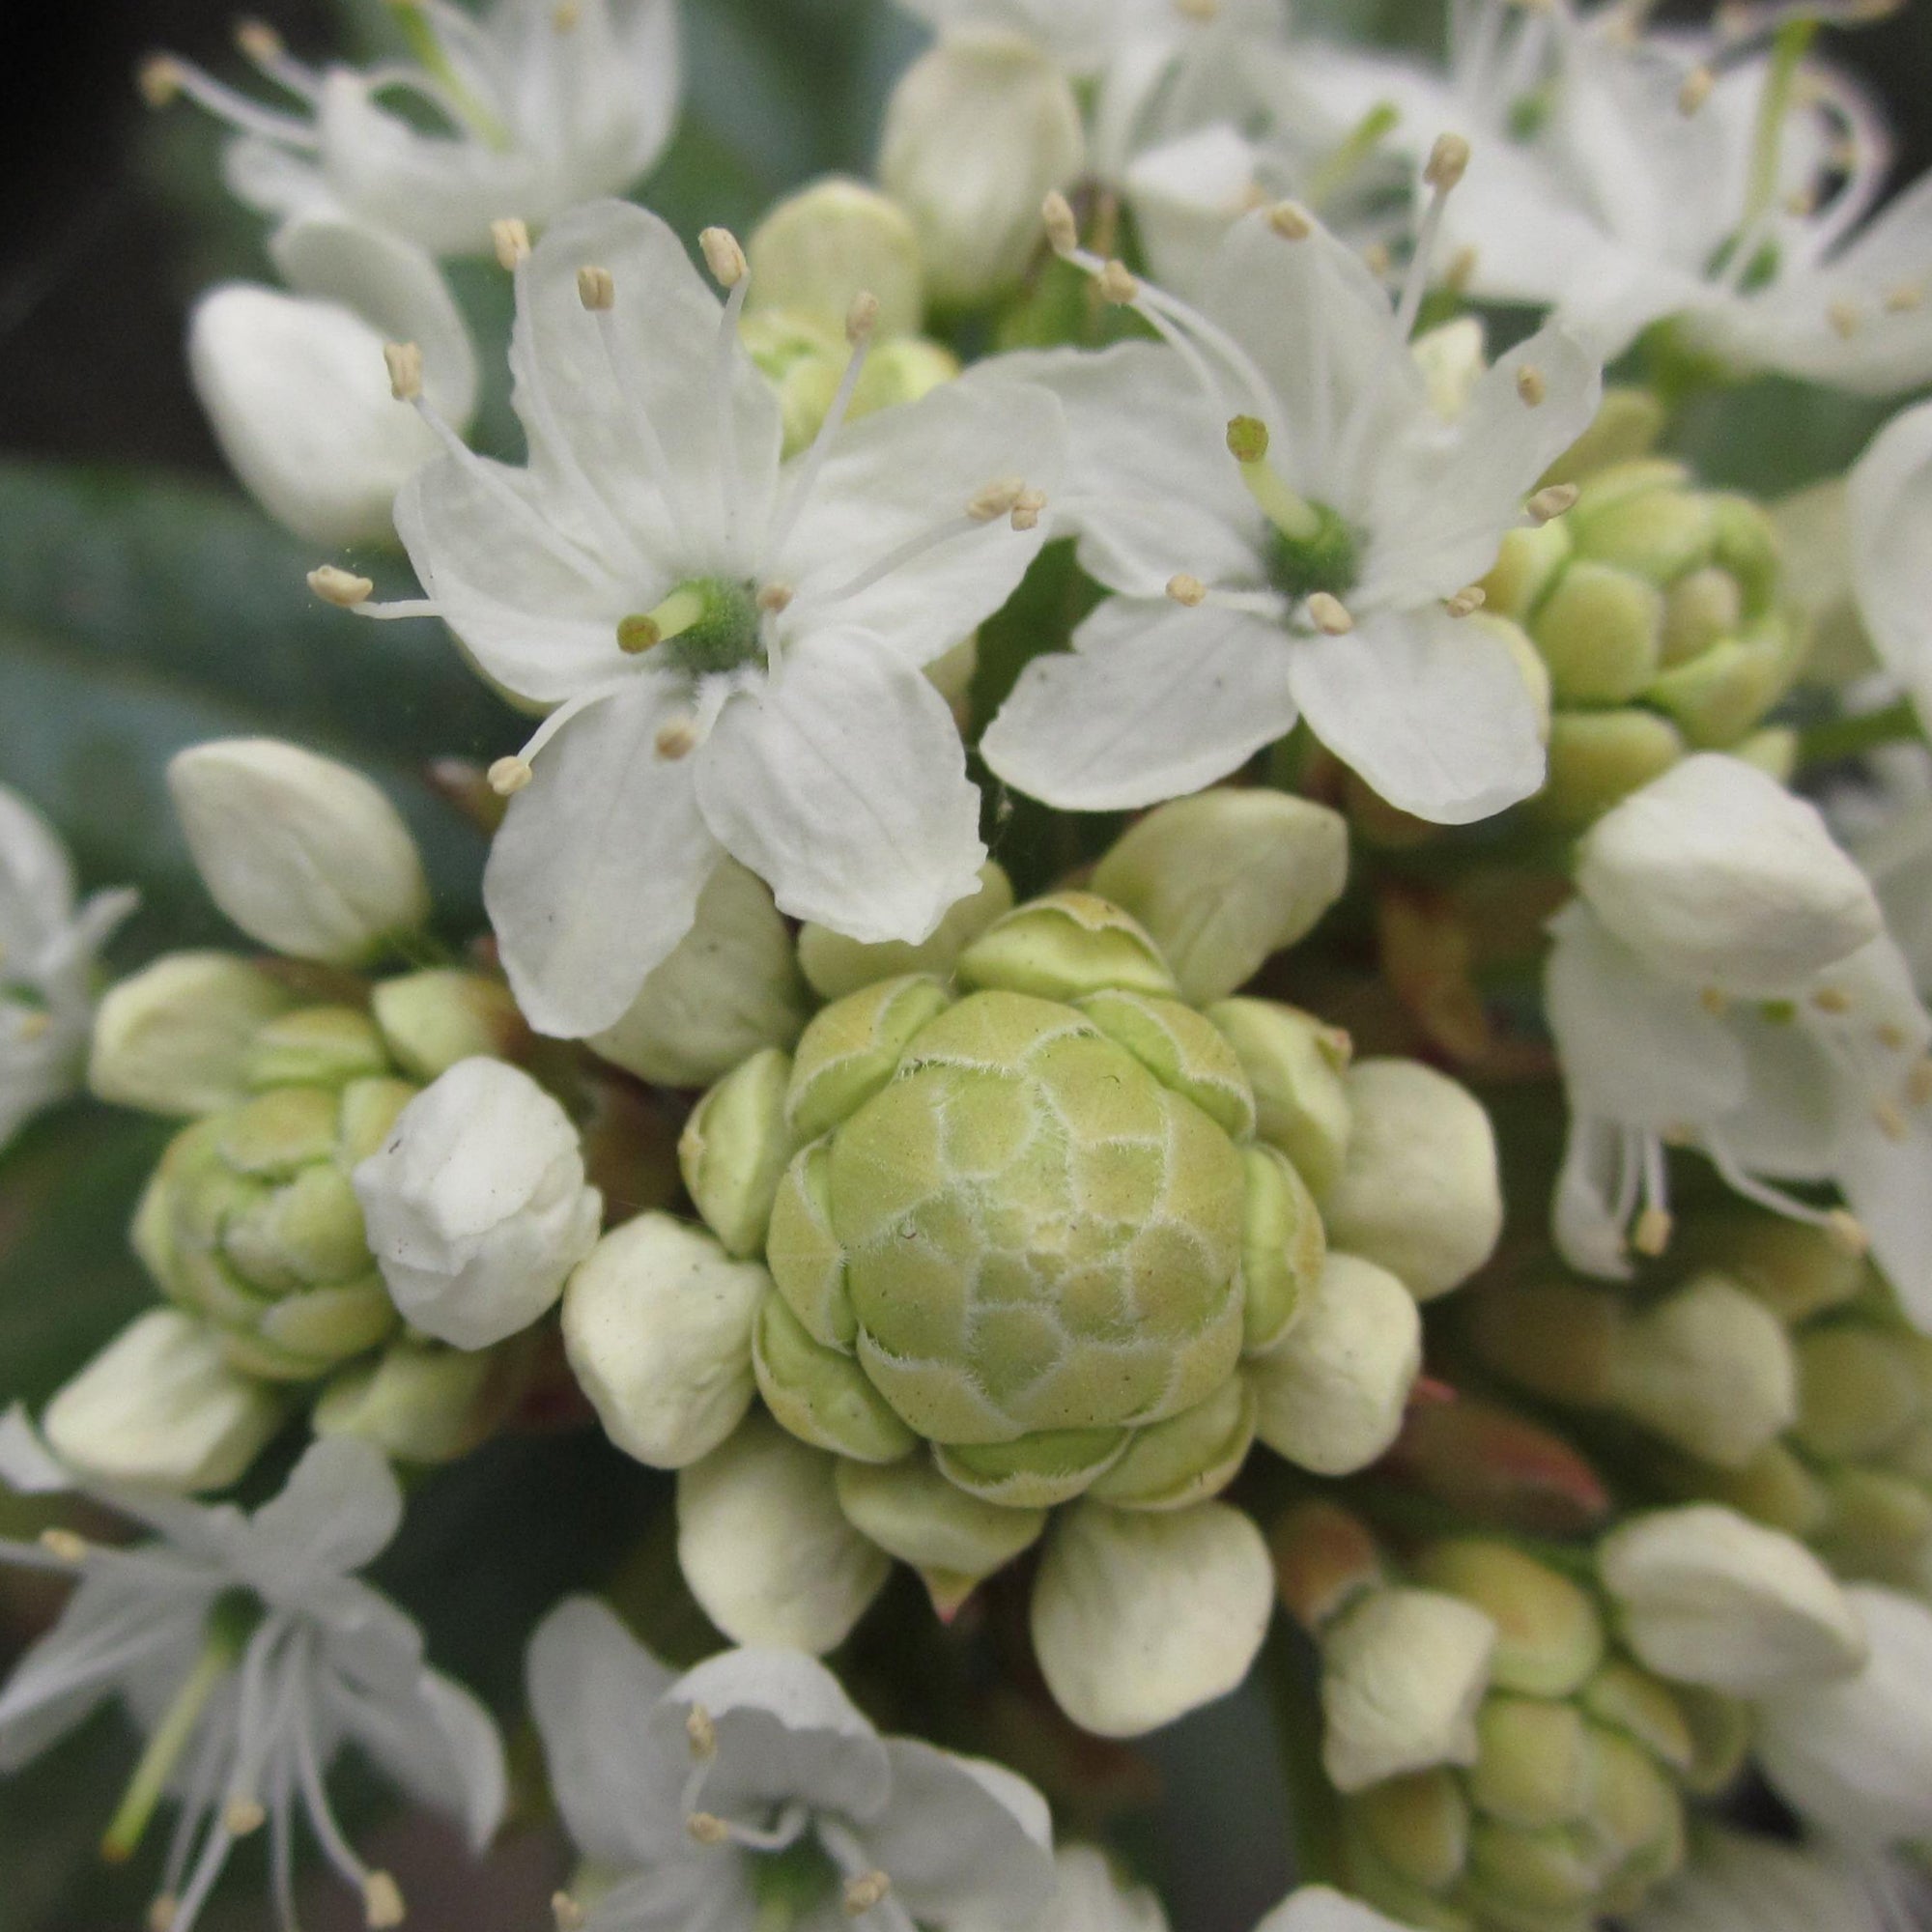 A large cluster of white flowers and buds.